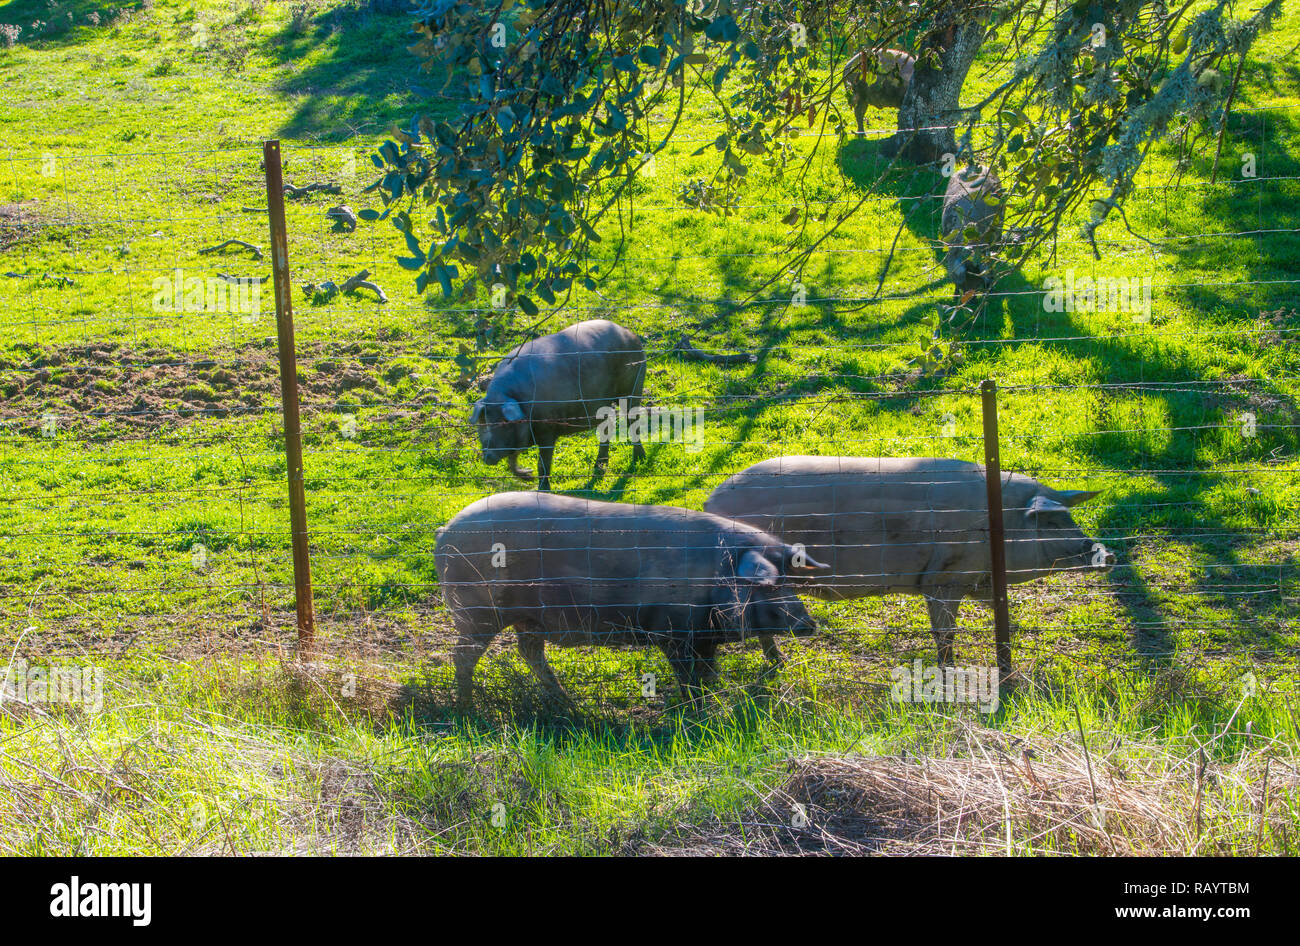 Iberian pigs. Los Pedroches valley, Cordoba province, Andalucia, Spain. Stock Photo